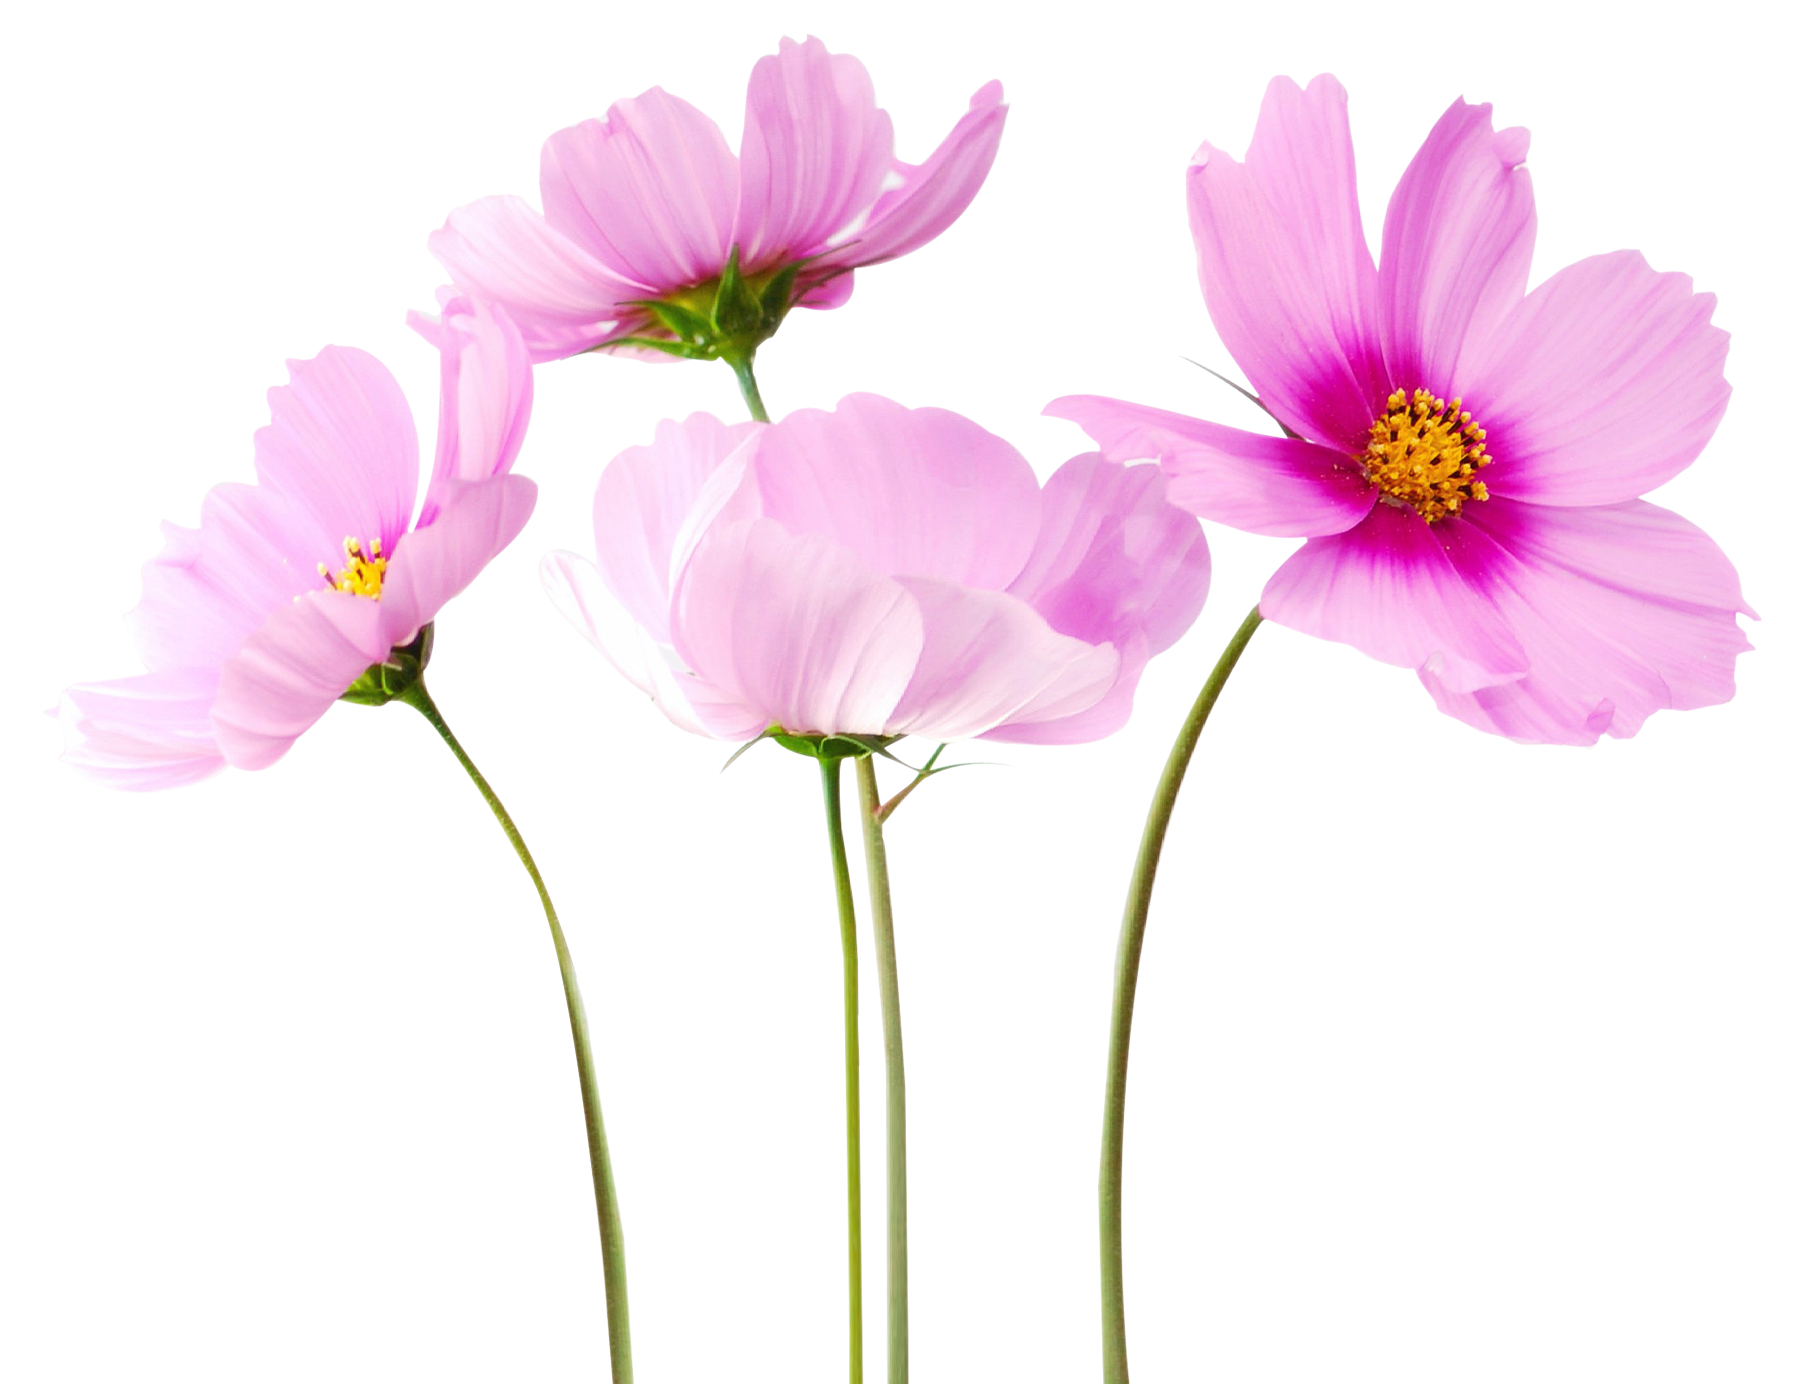 Cosmea Flower Png Image - Flower, Transparent background PNG HD thumbnail